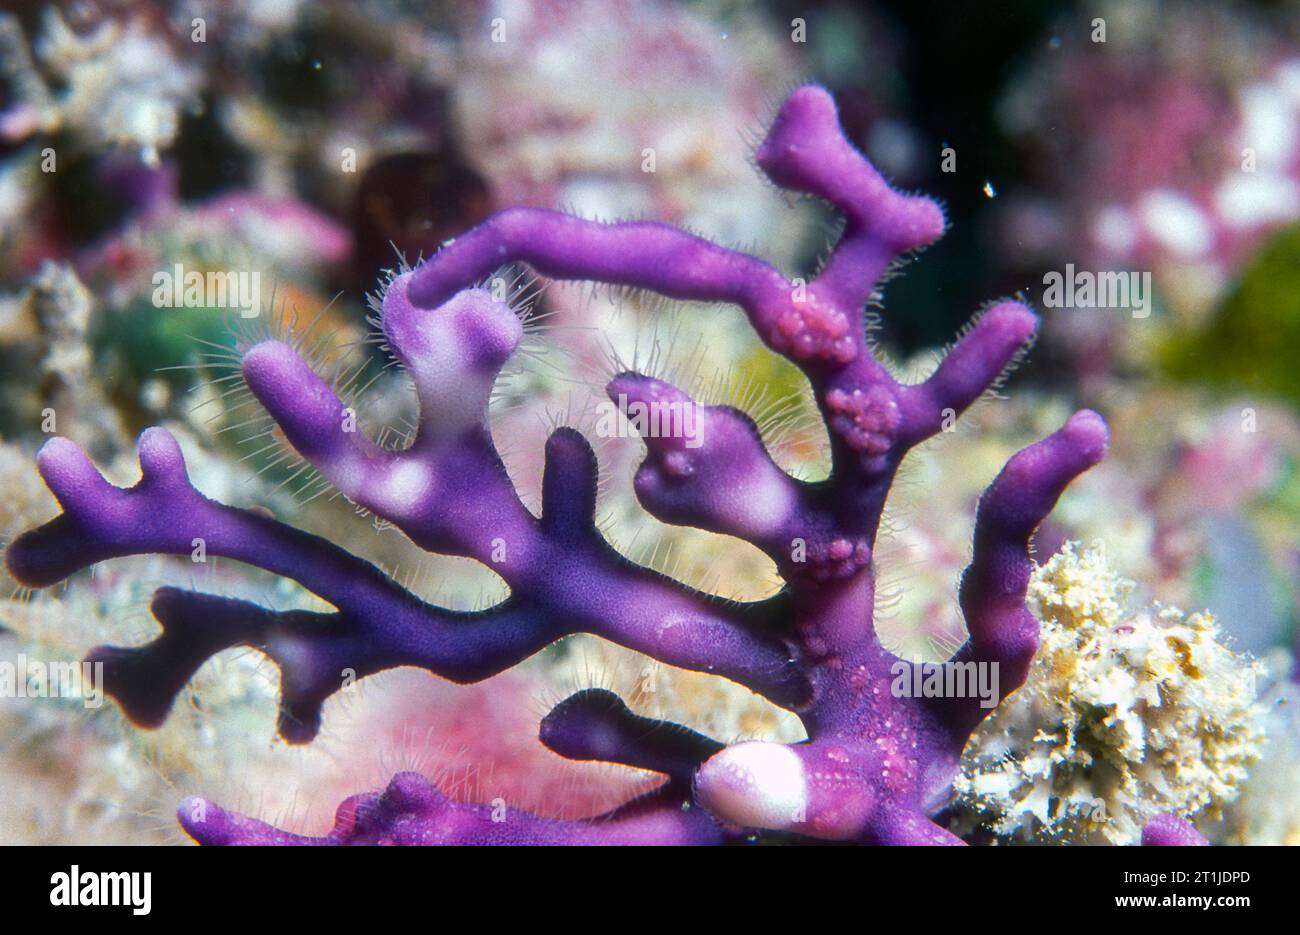 Hydrocoral (Distichopora violacea) from shallow water in the Maldives. Stock Photo